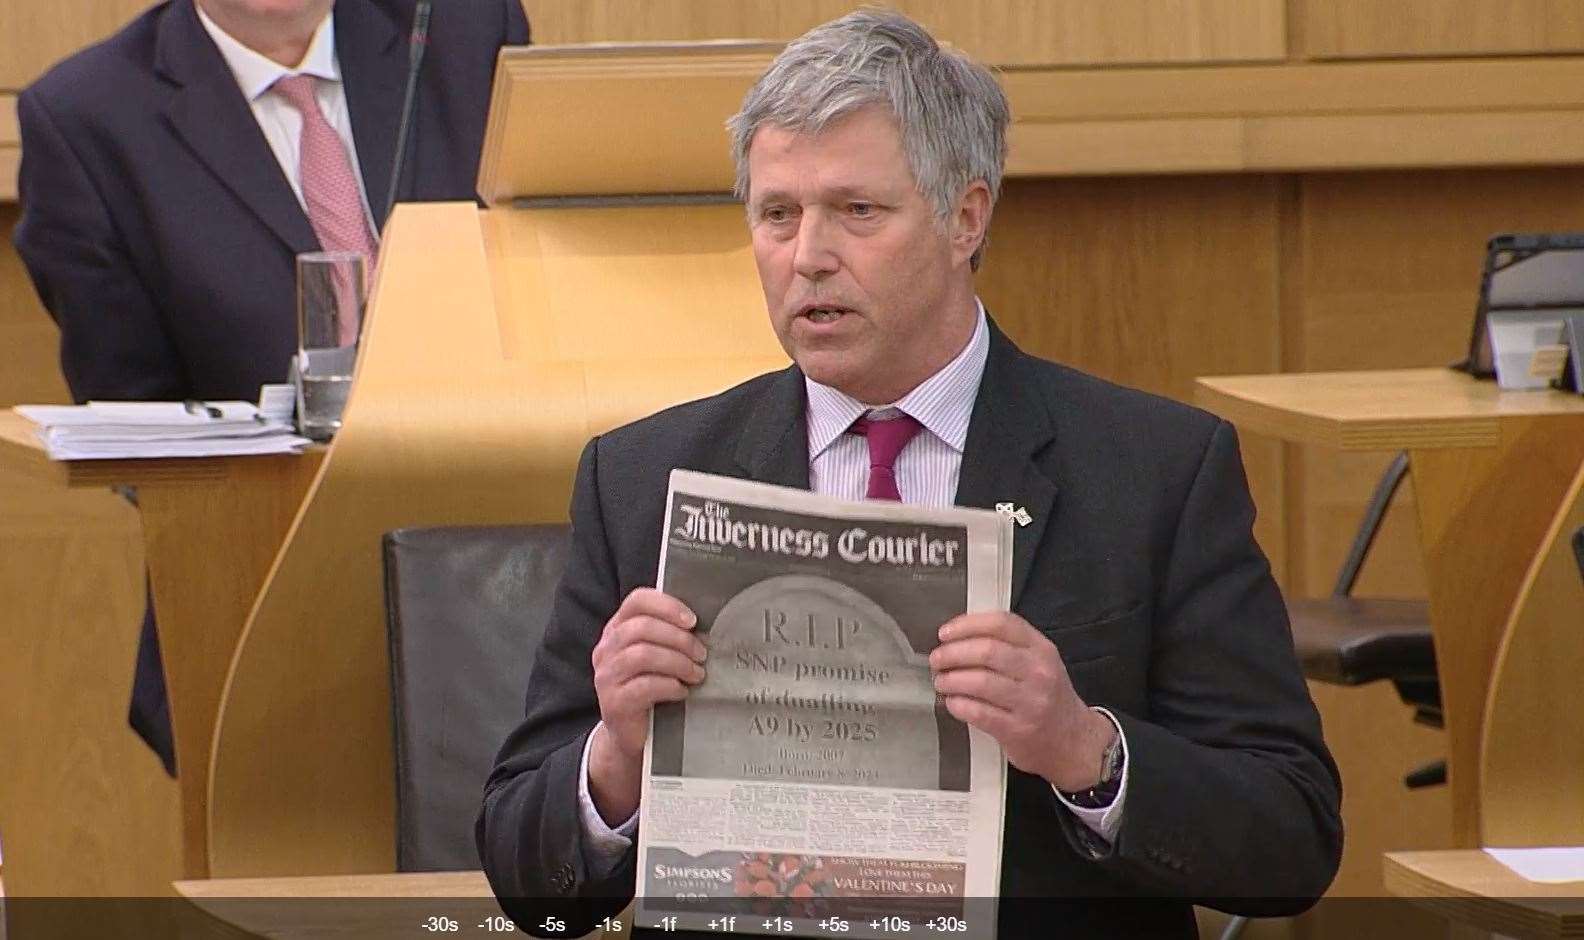 The Inverness Courier frontpage being shown in parliament by MSP Edward Mountain